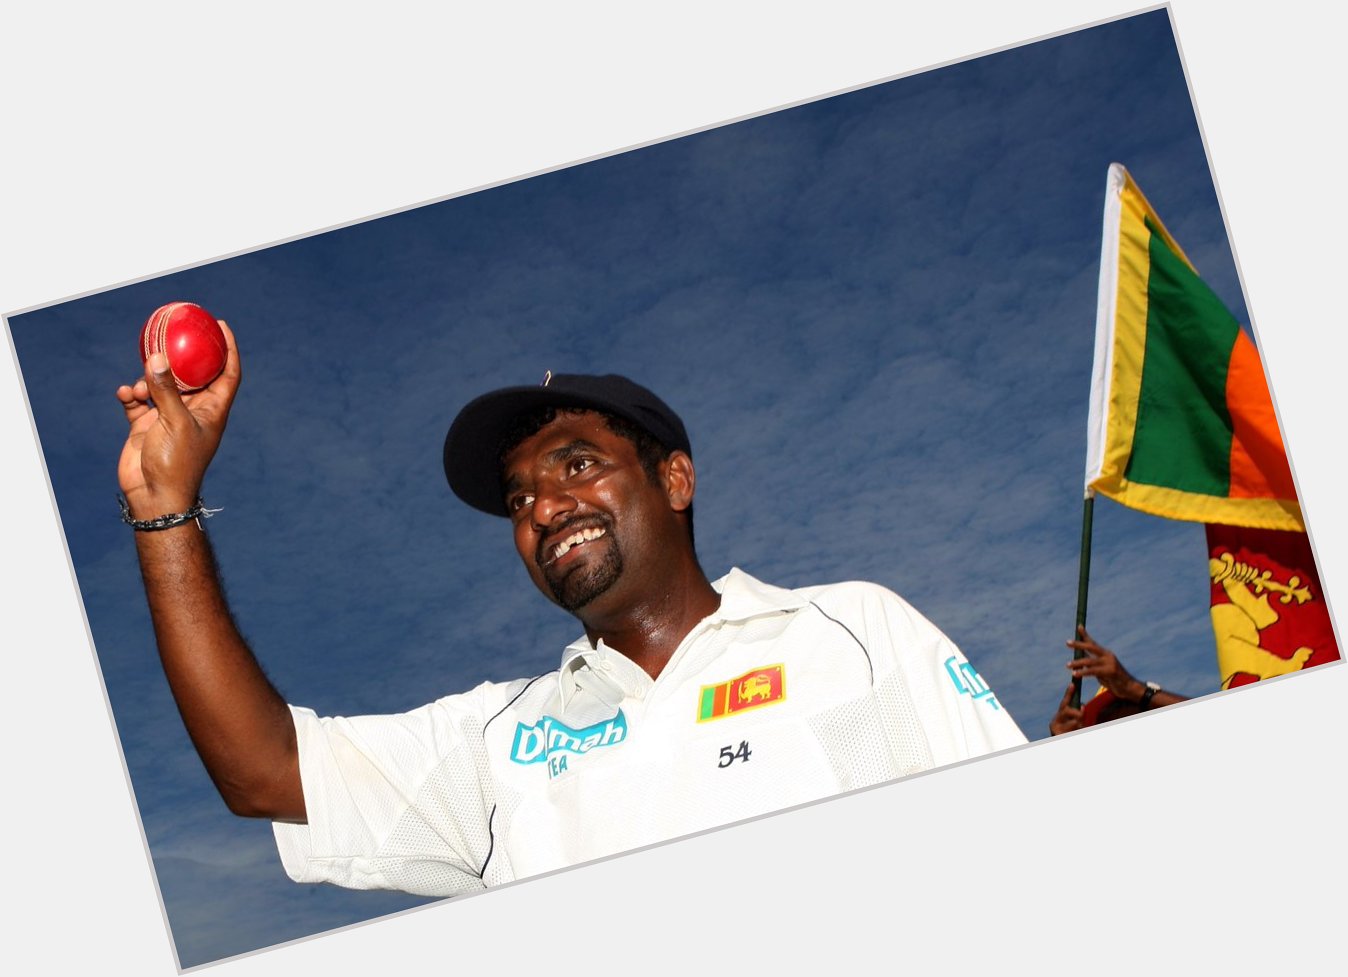 133 Tests
800 Test wickets
67 five wicket innings
22 ten wicket matches

Happy birthday, Muttiah Muralitharan. 